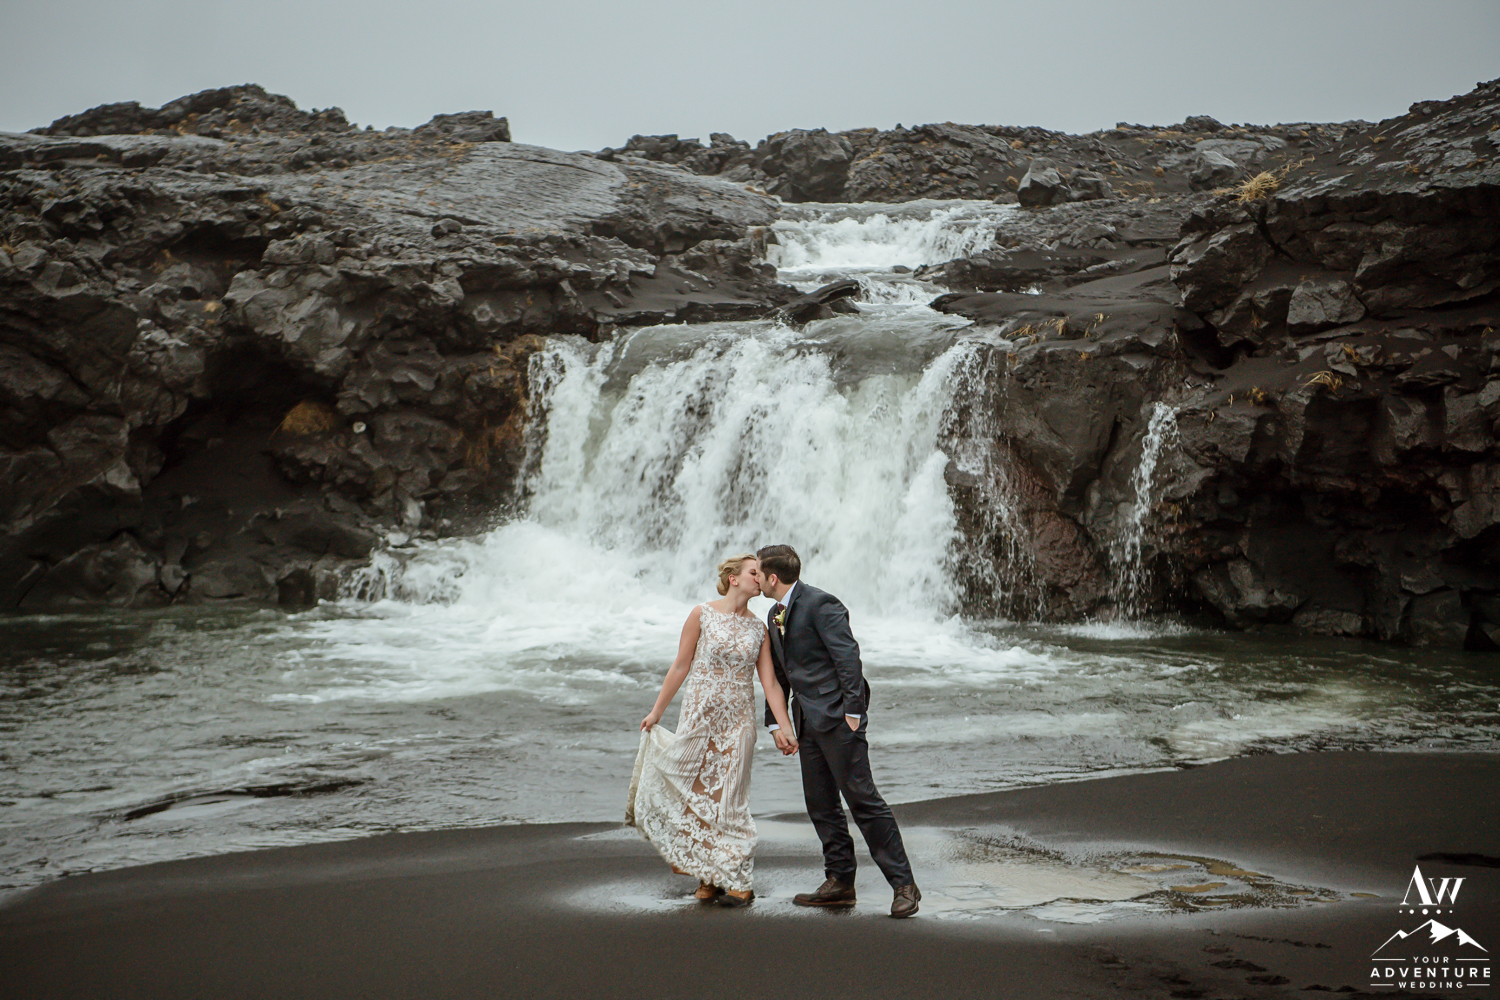 Couple Kissing in front of a waterfall in Iceland